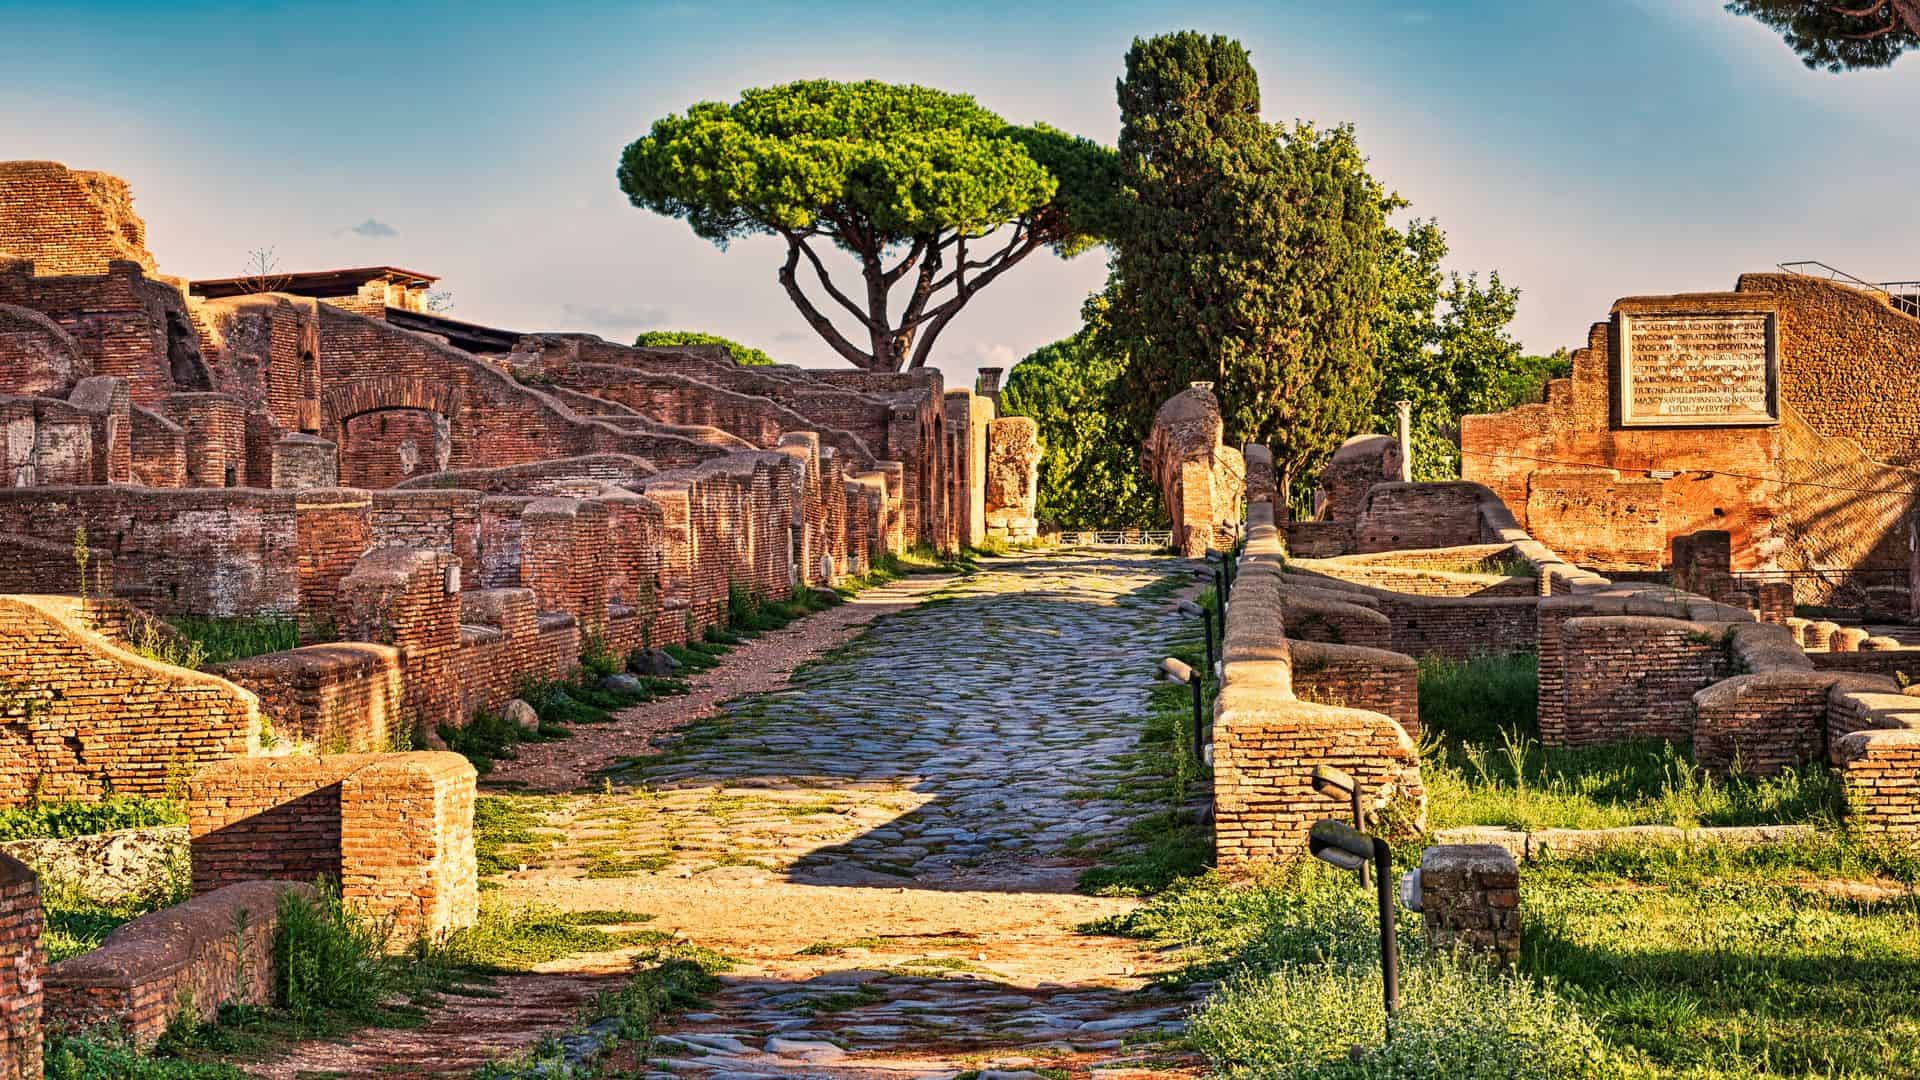 Street view of the ancient city of Ostia Antica.